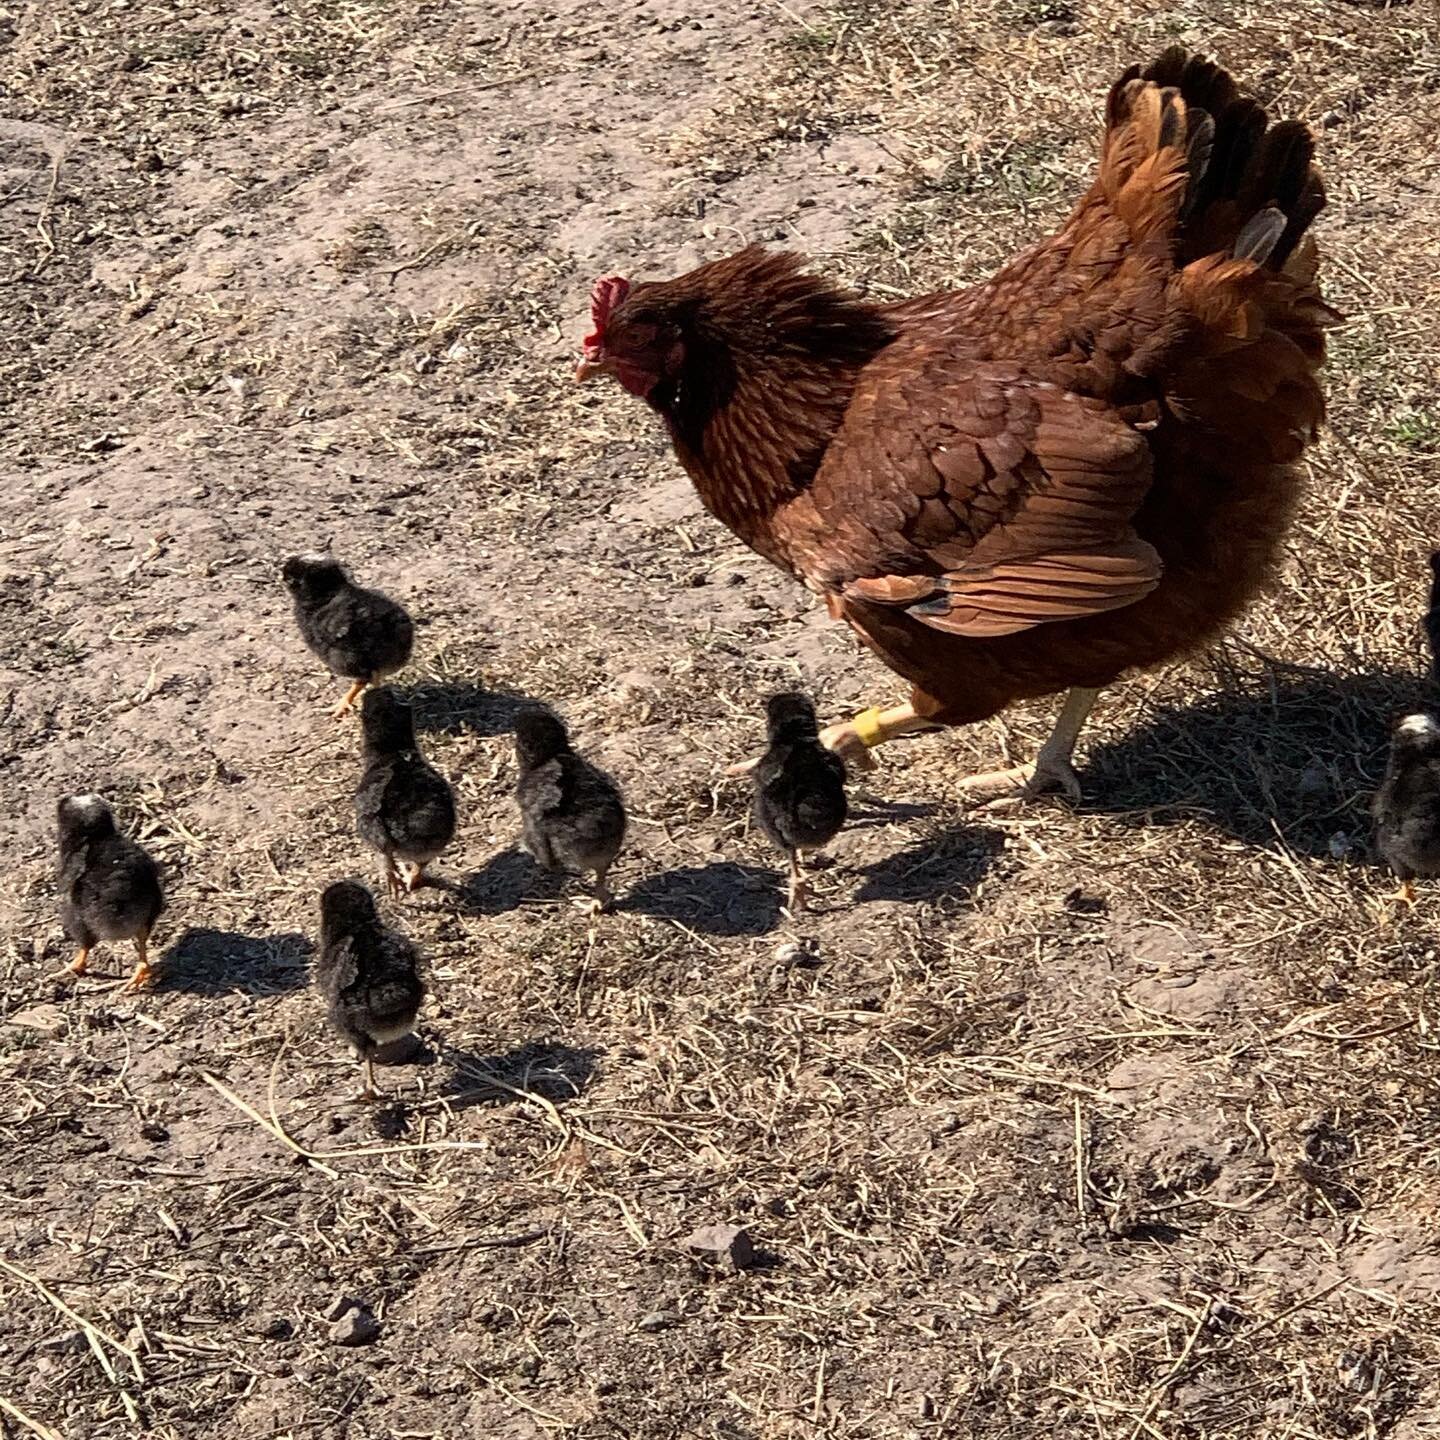 Sometimes our hens hide and come back with new additions.